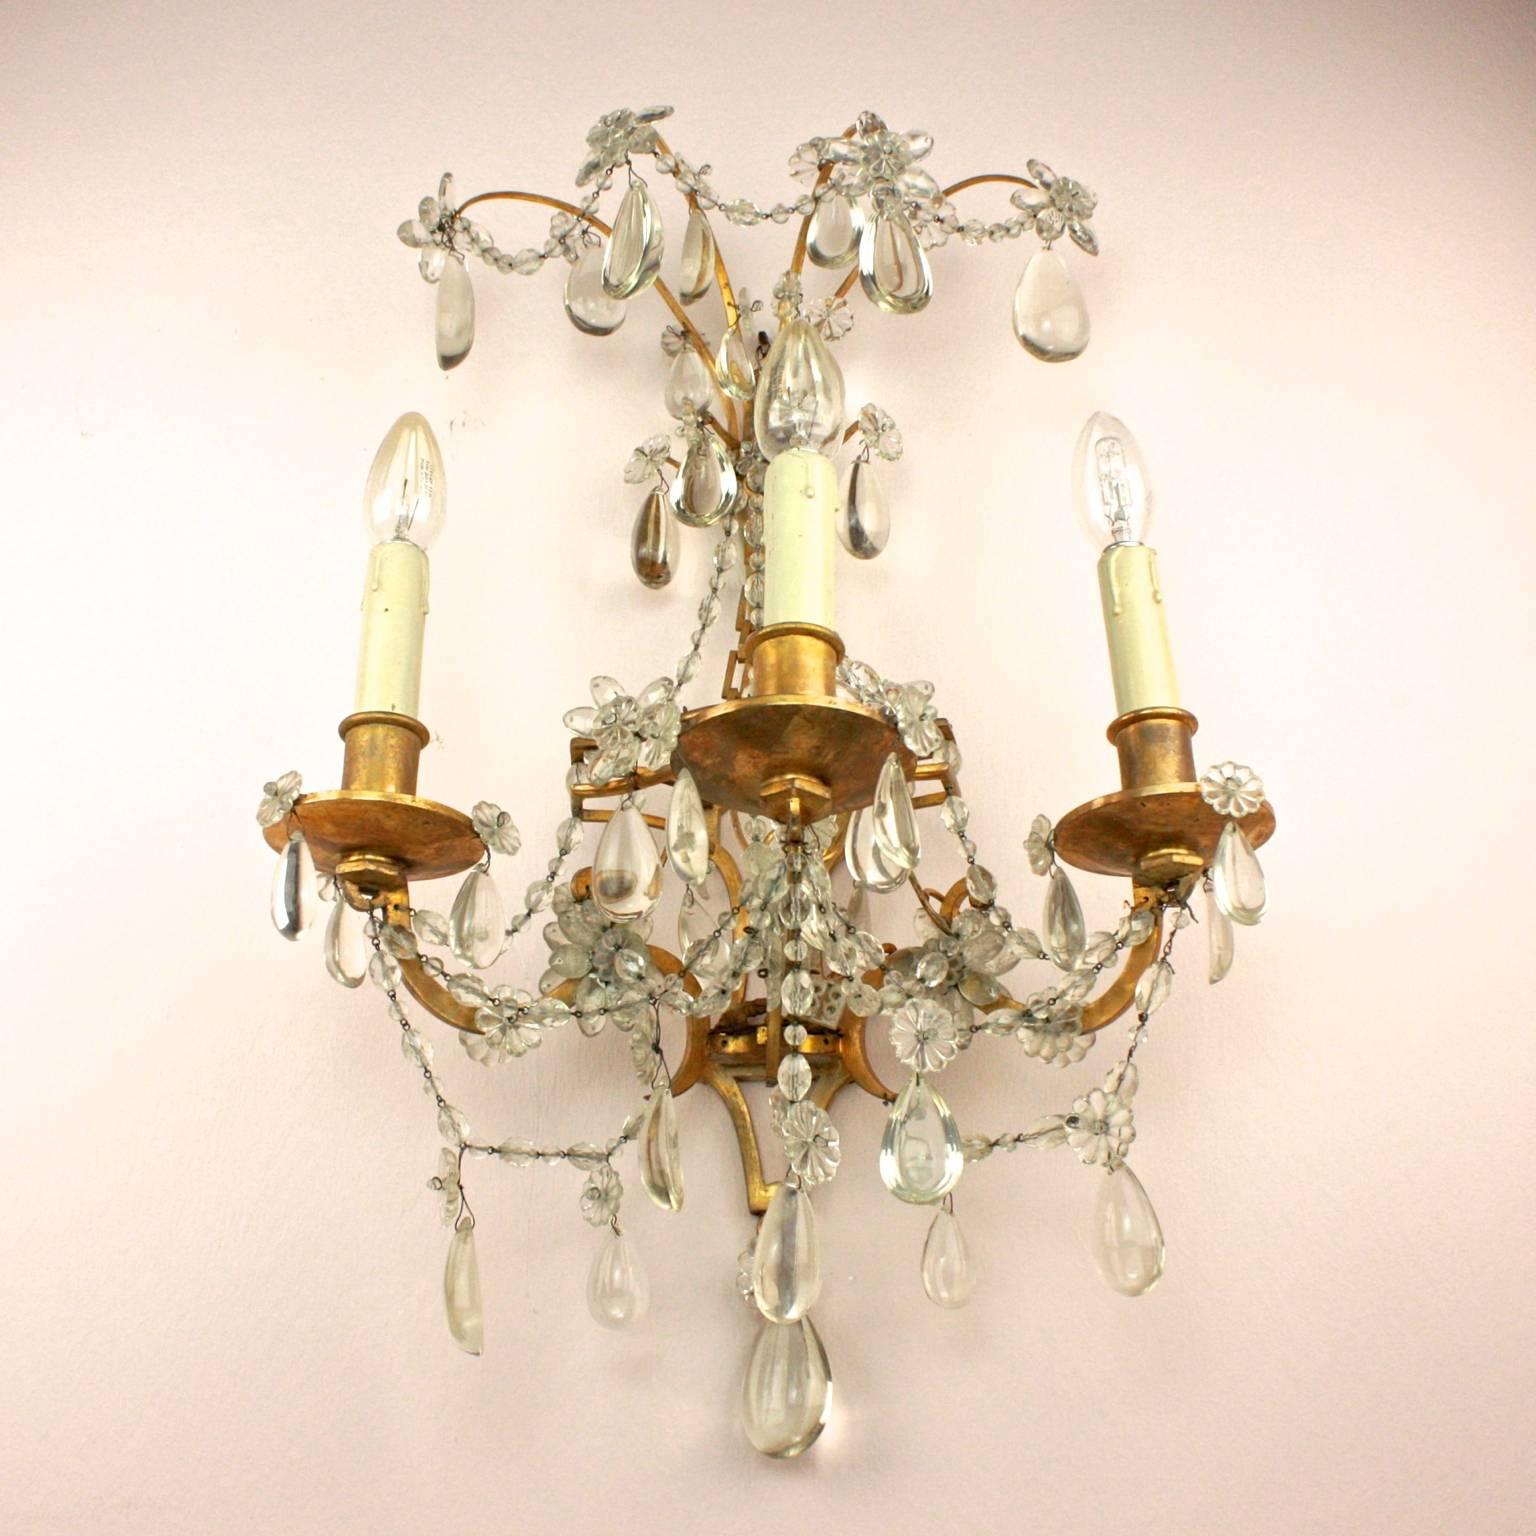 A pair of Louis XVI style Maison Bagues three branch wall sconce or wall lights, each with splays of flowerheads on top, its back plate issuing three S-shaped candle arms hang with drops and beautifully arranged crystal flowers.

Since its